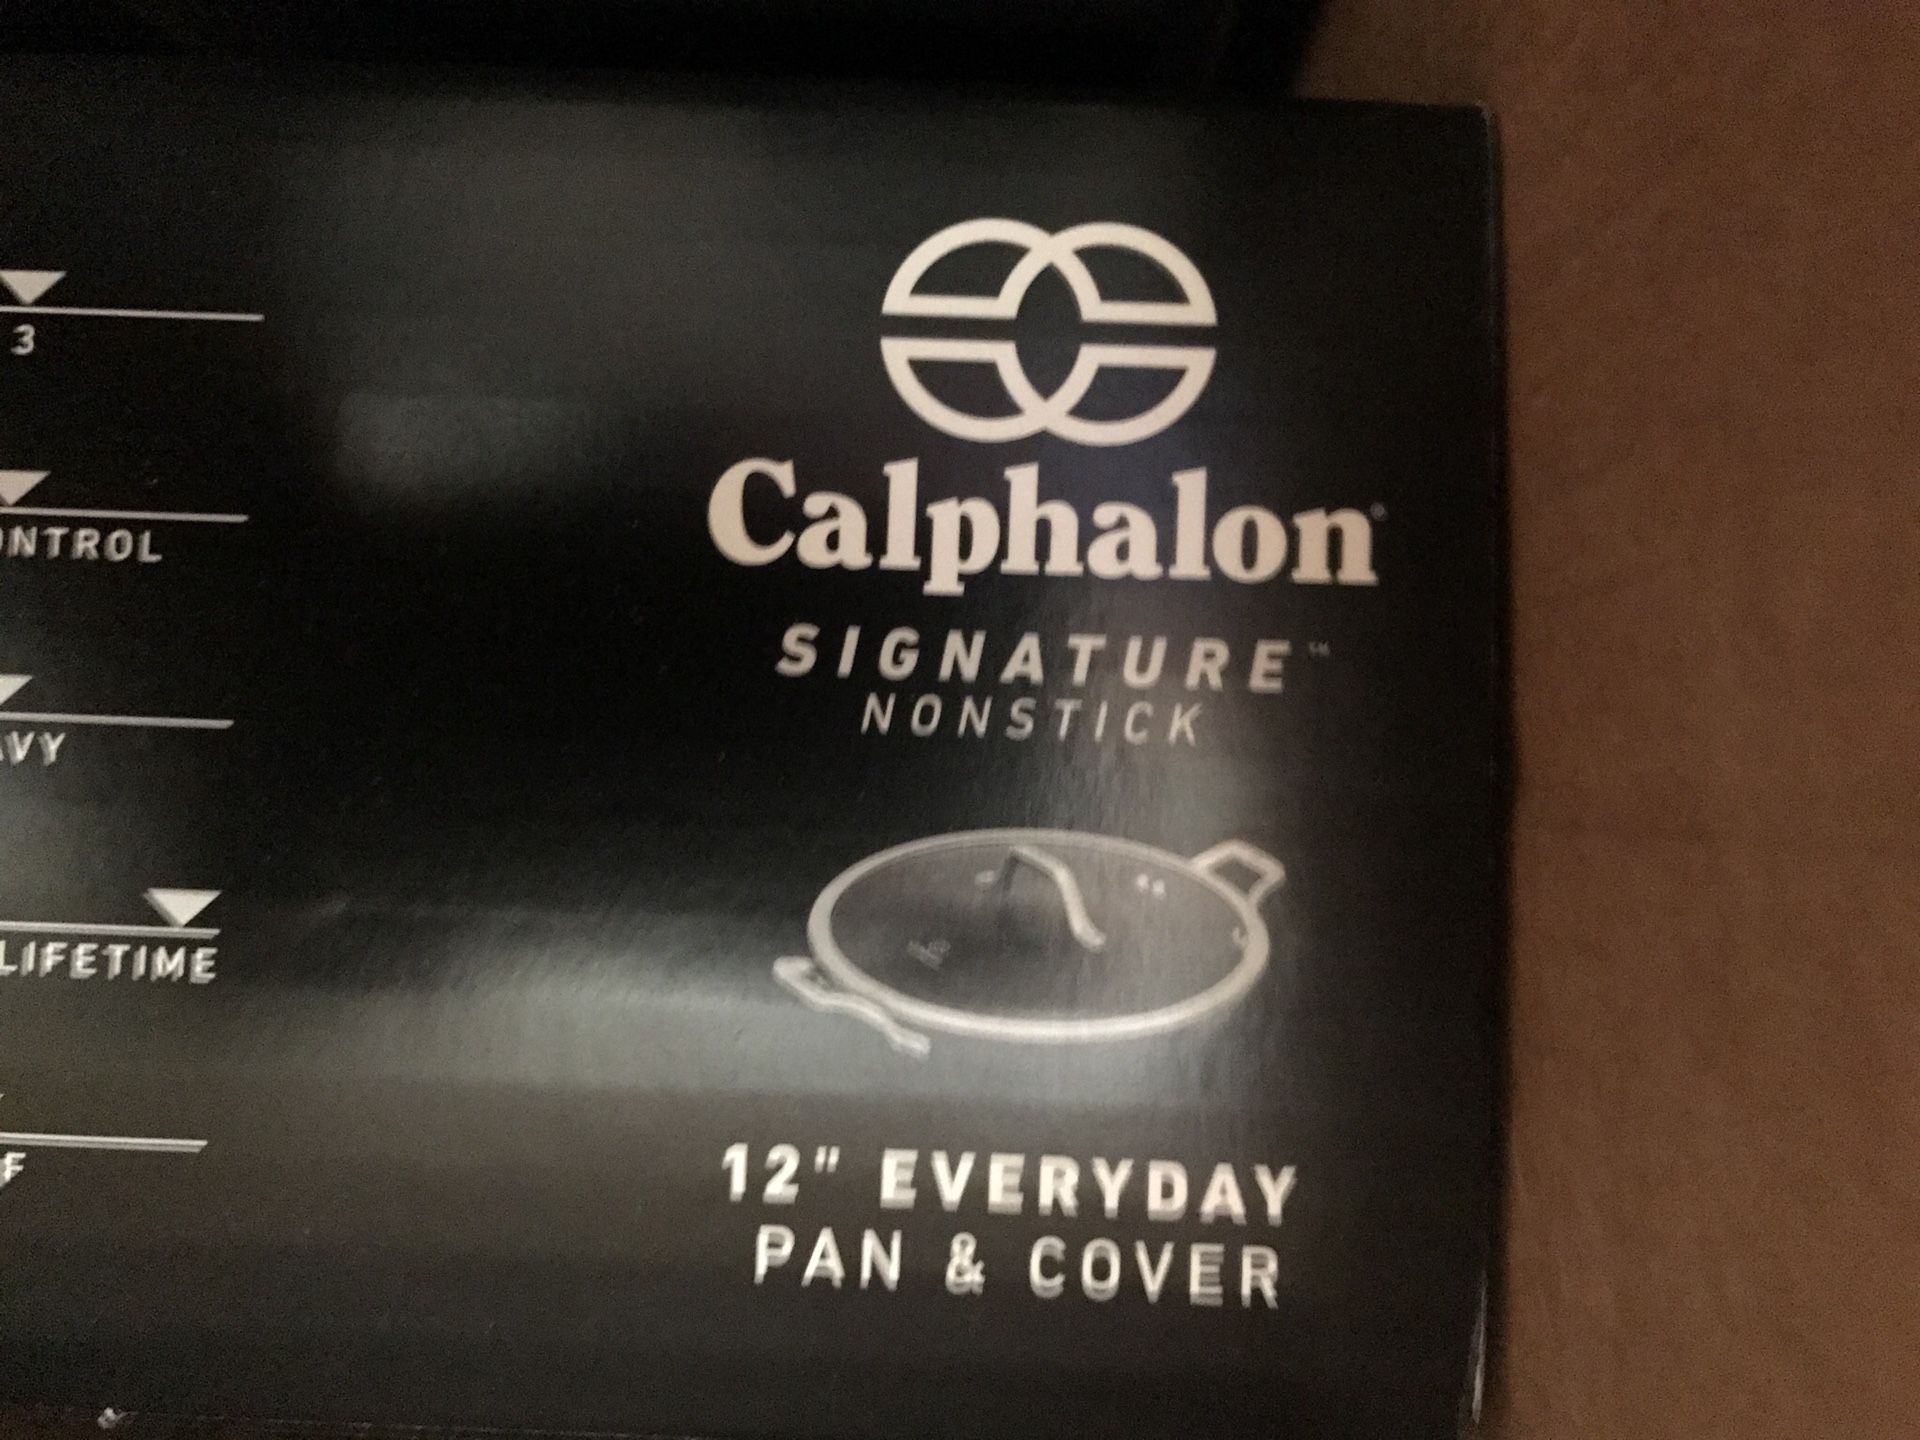 Calphalon Signature Nonstick 12-inch Everyday Pan with Cover